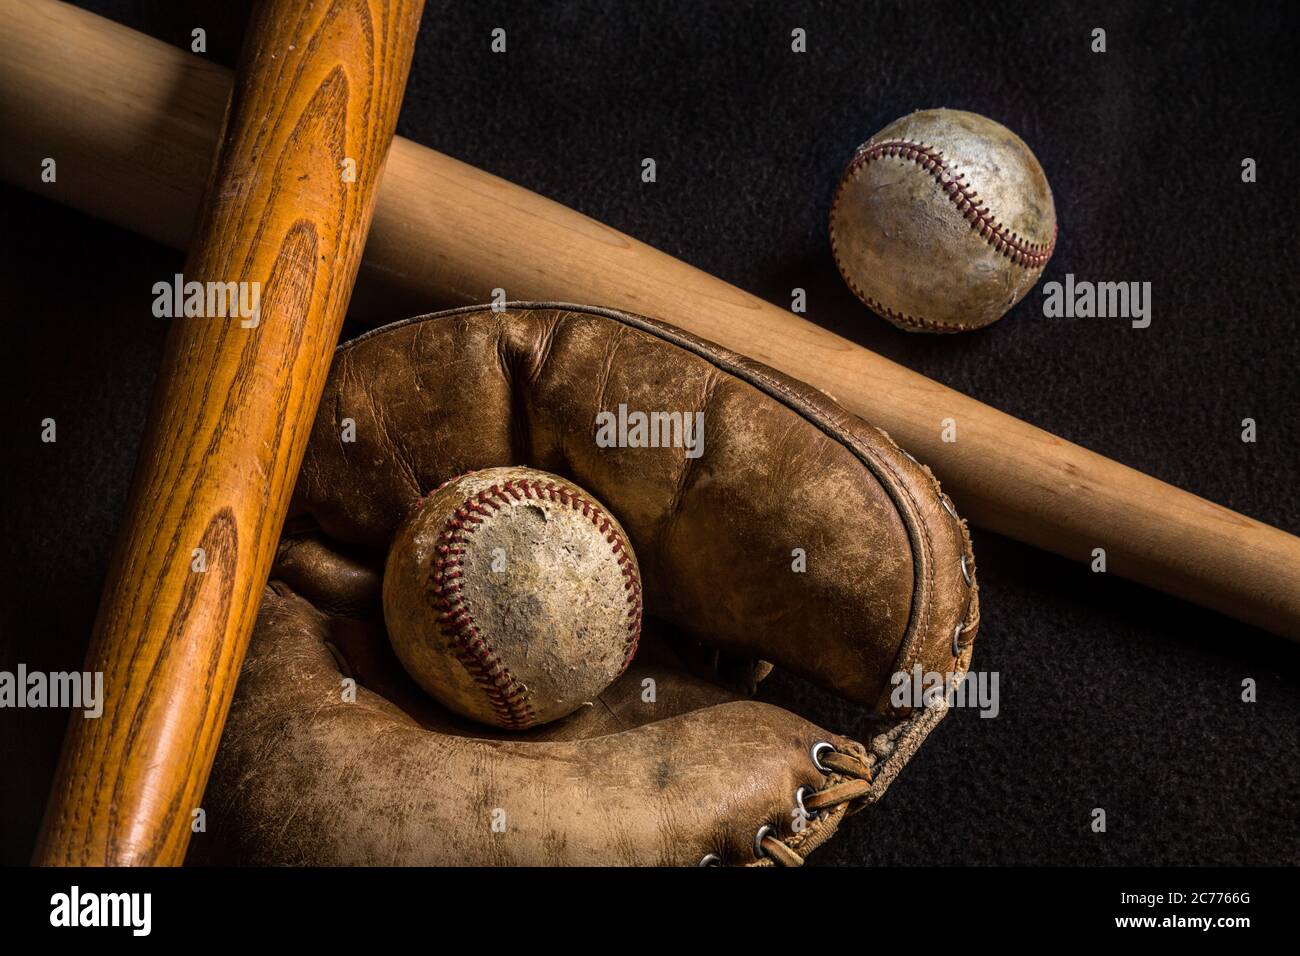 Two baseballs and a glove along with an old and new baseball bat. All but the new bat is scratched and worn from years of love of the game. Stock Photo